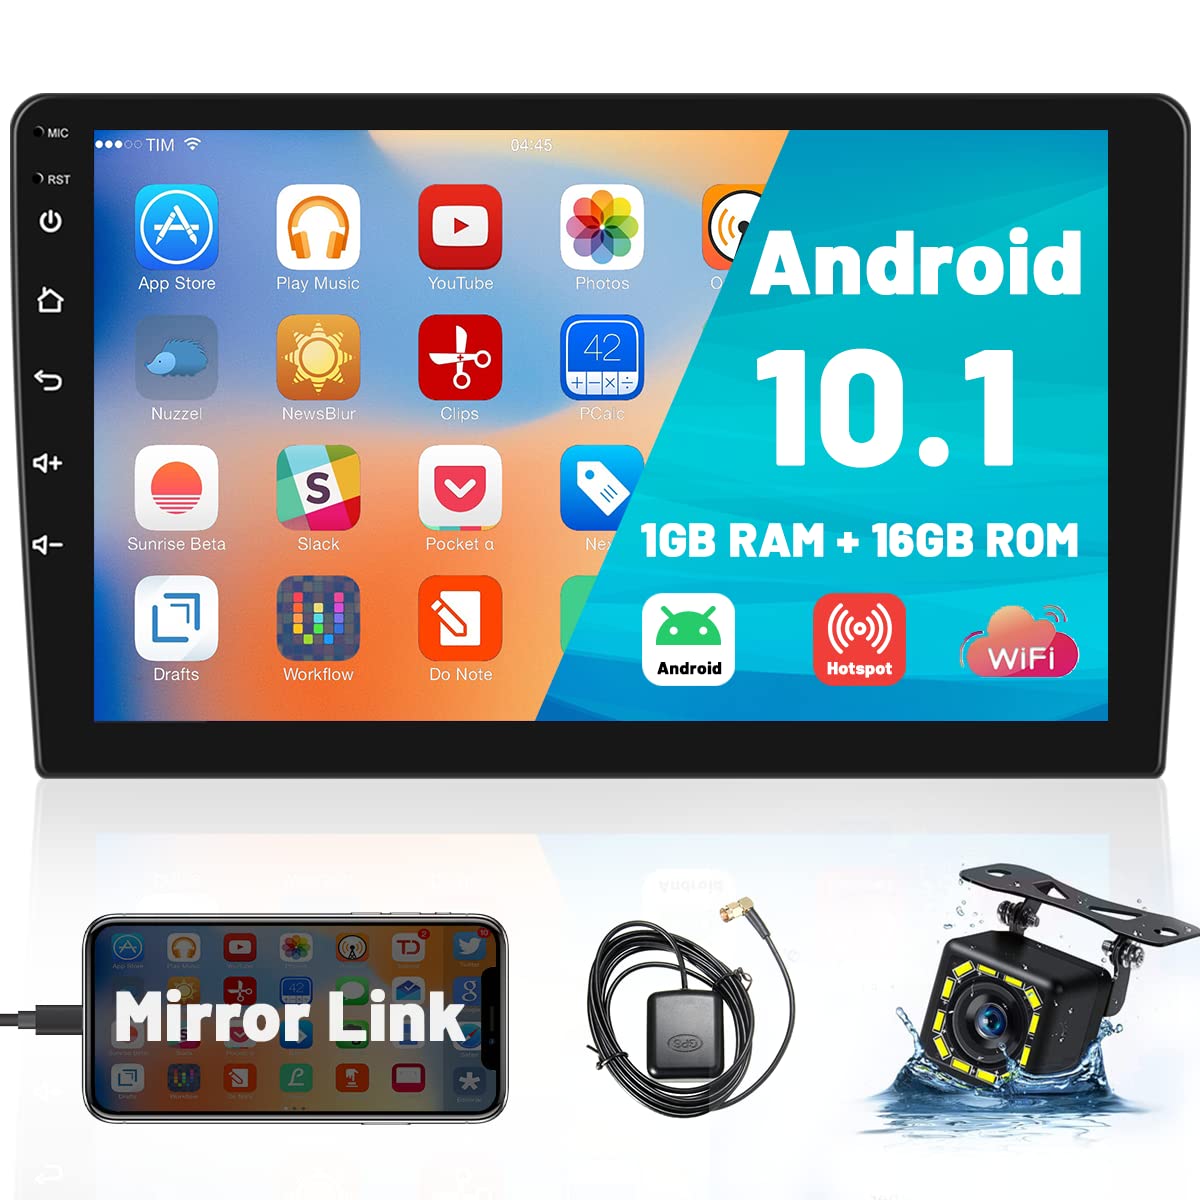 Hikity 10.1 Android Car Stereo Double Din 10.1 Inch Touch Screen Car Radio GPS Navigation Bluetooth FM Radio Support WiFi Mir